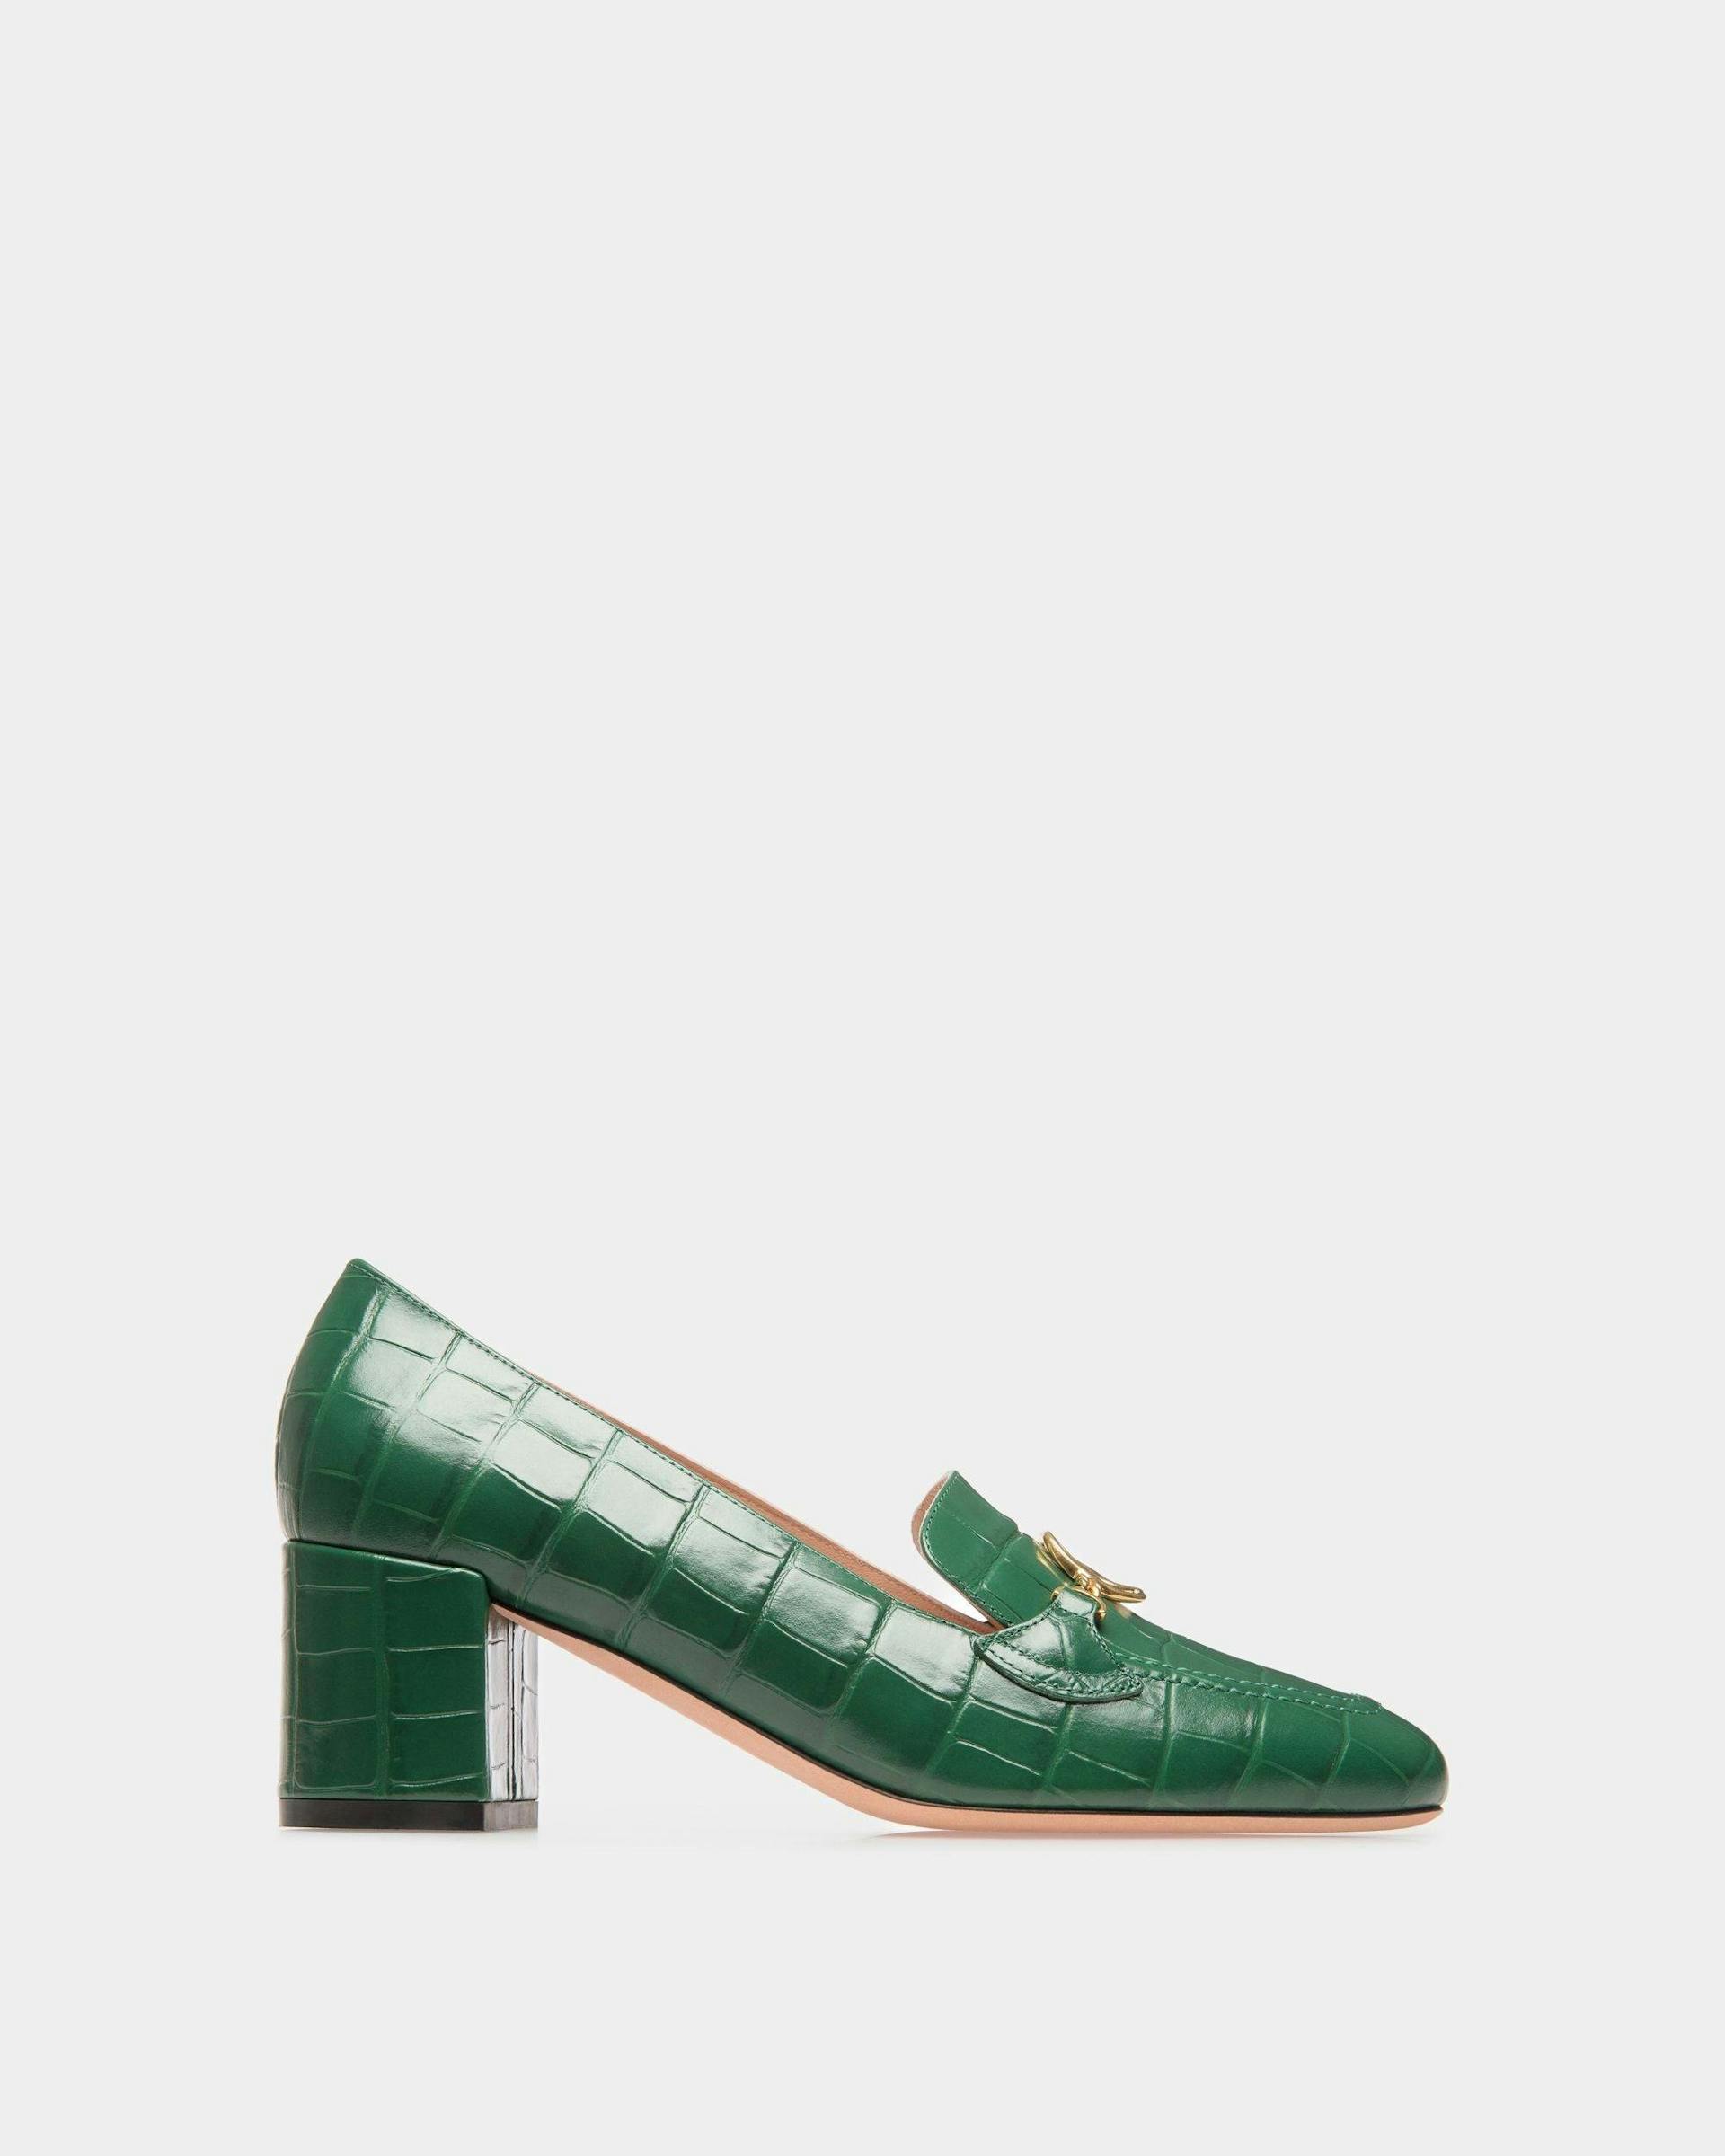 Daily Emblem Loafers - Bally